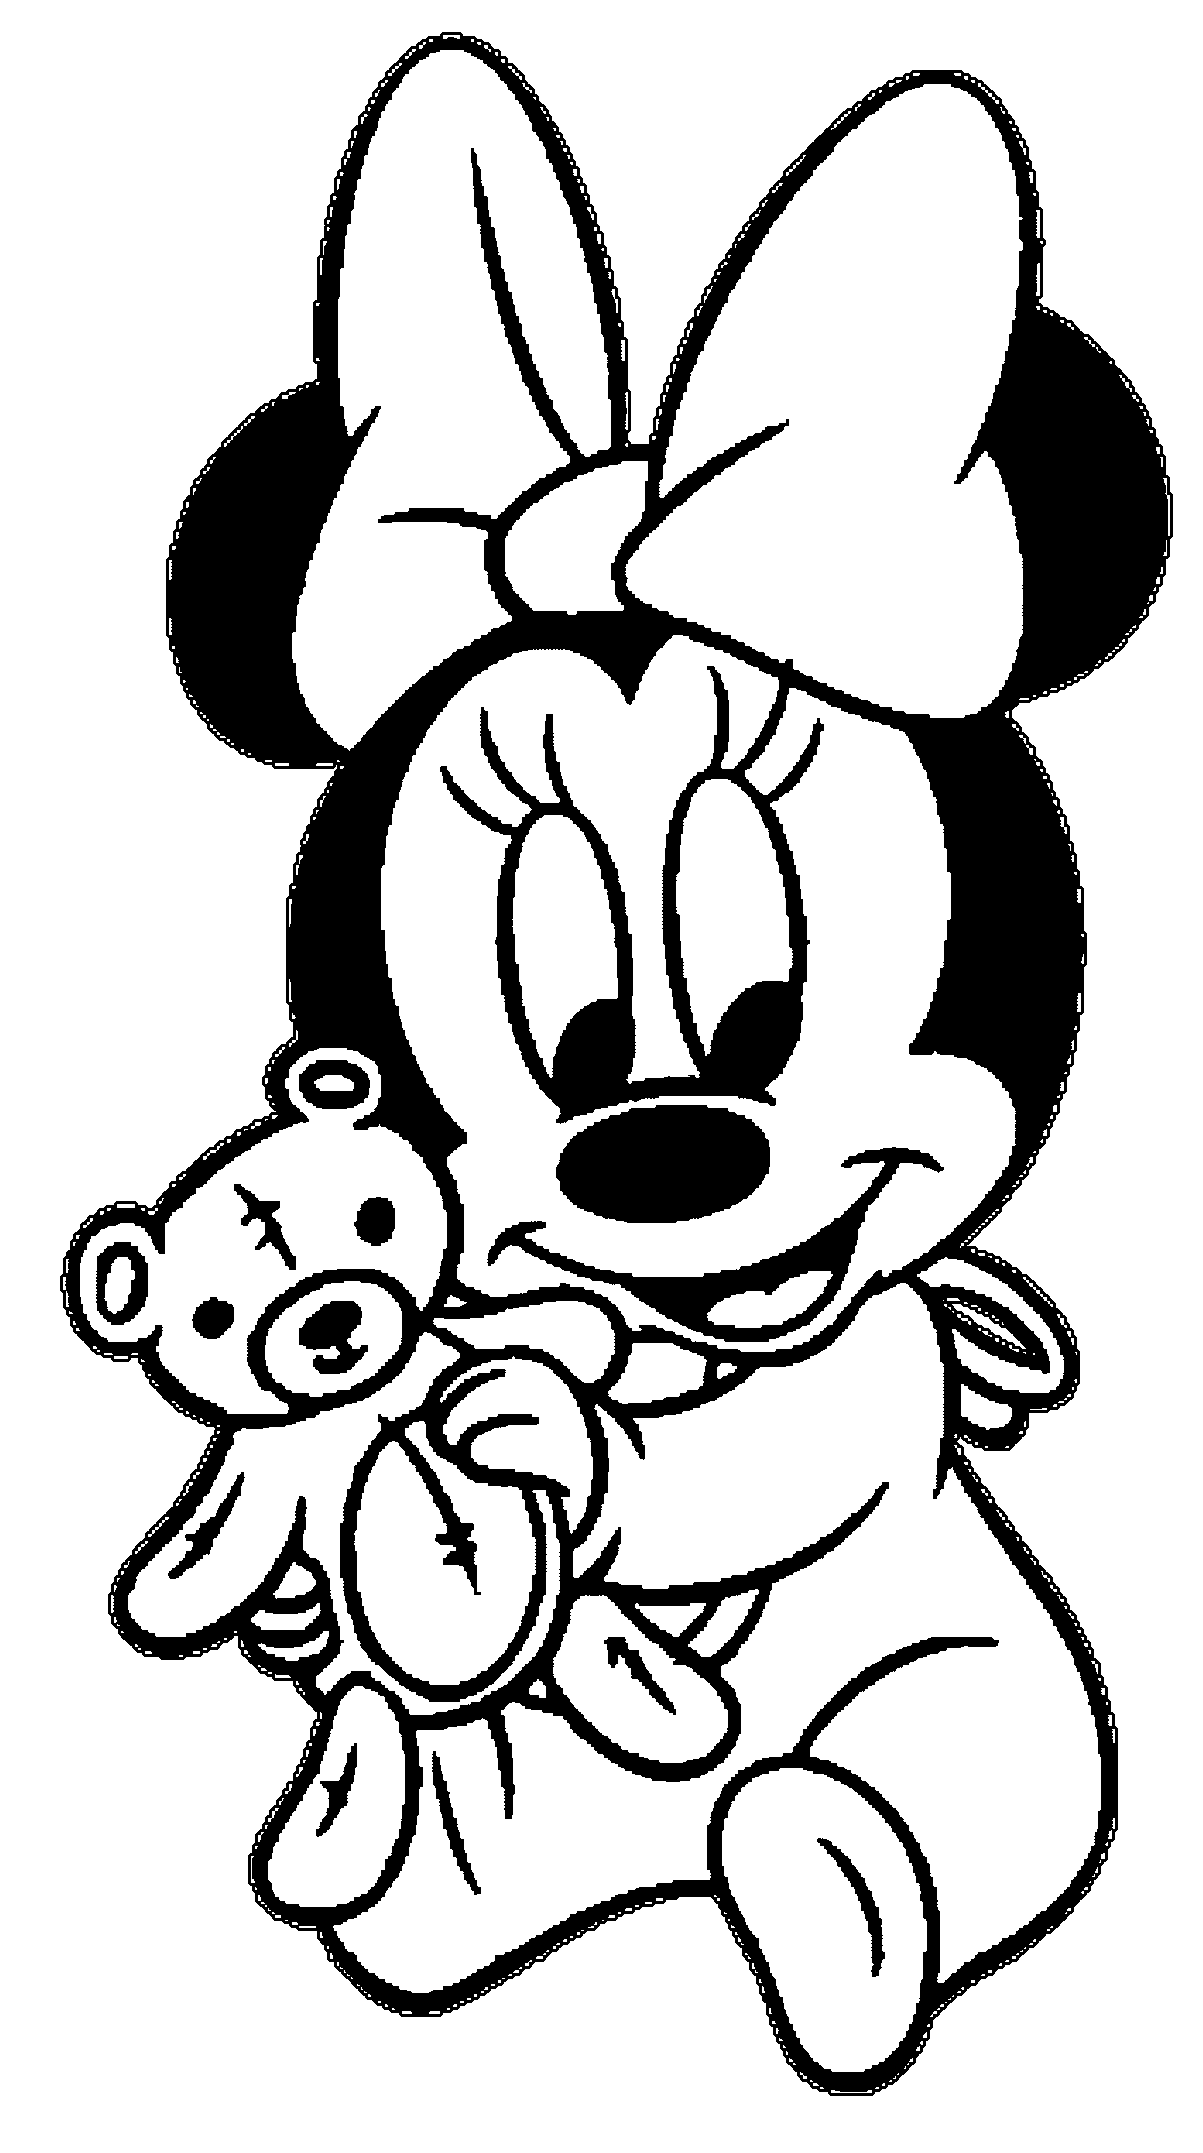 Baby Minnie Teddy Bear Coloring Page | Wecoloringpage